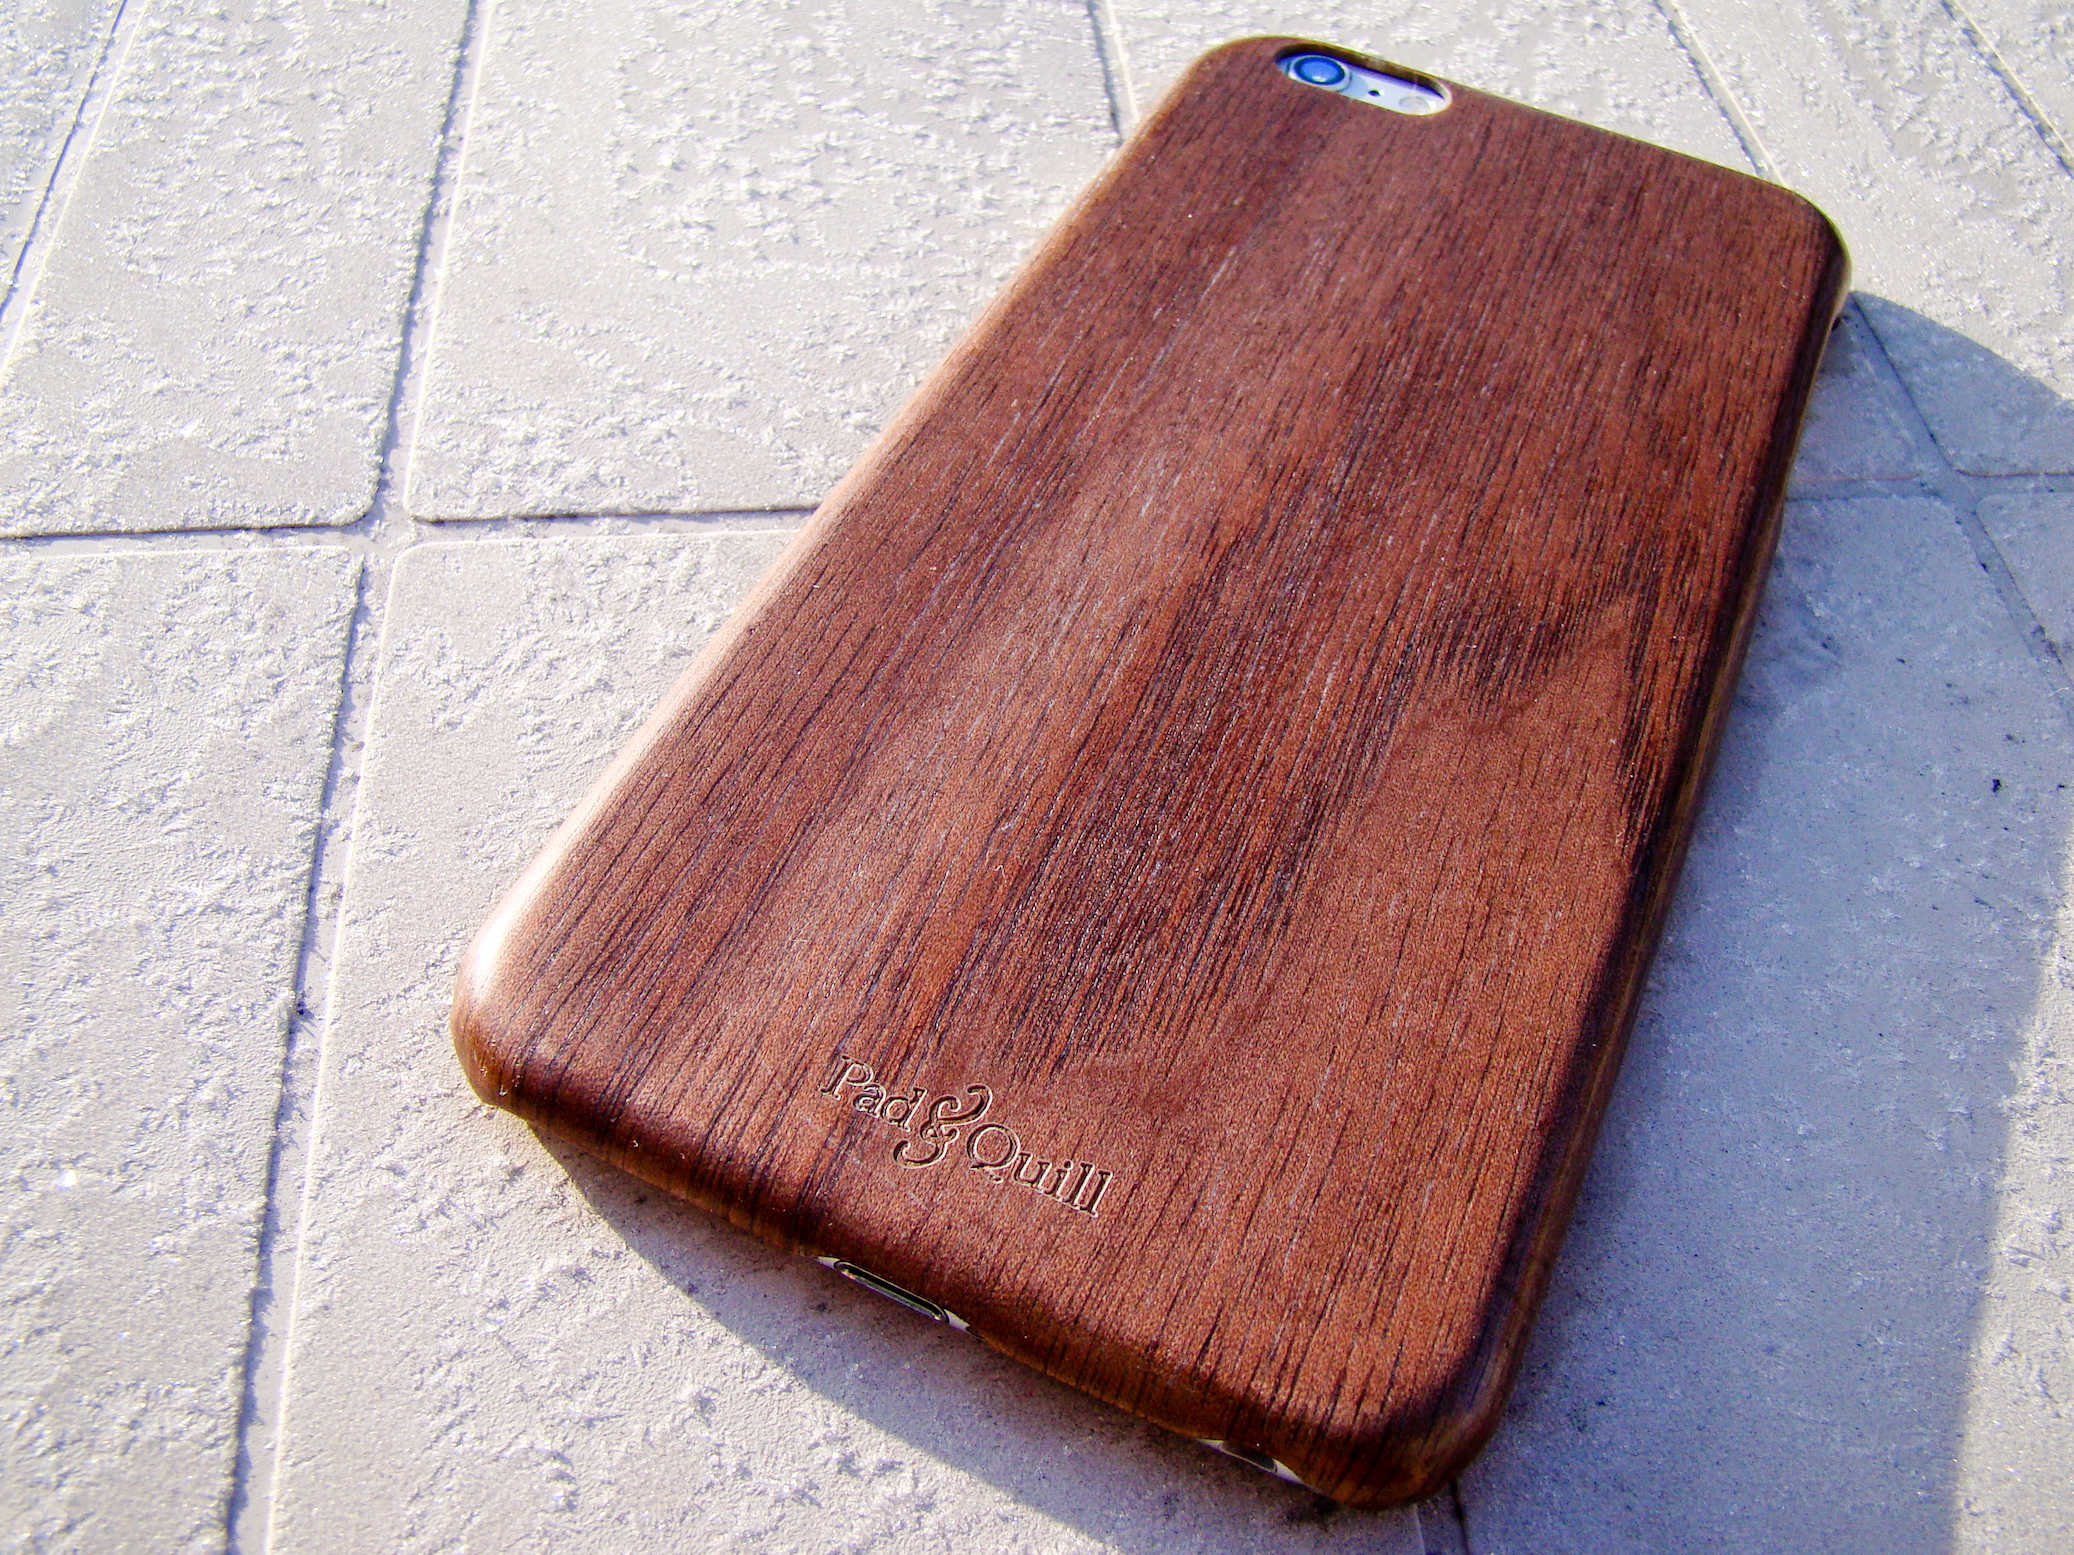 The Woodline case by Pad & Quill will class up your iPhone with ease.